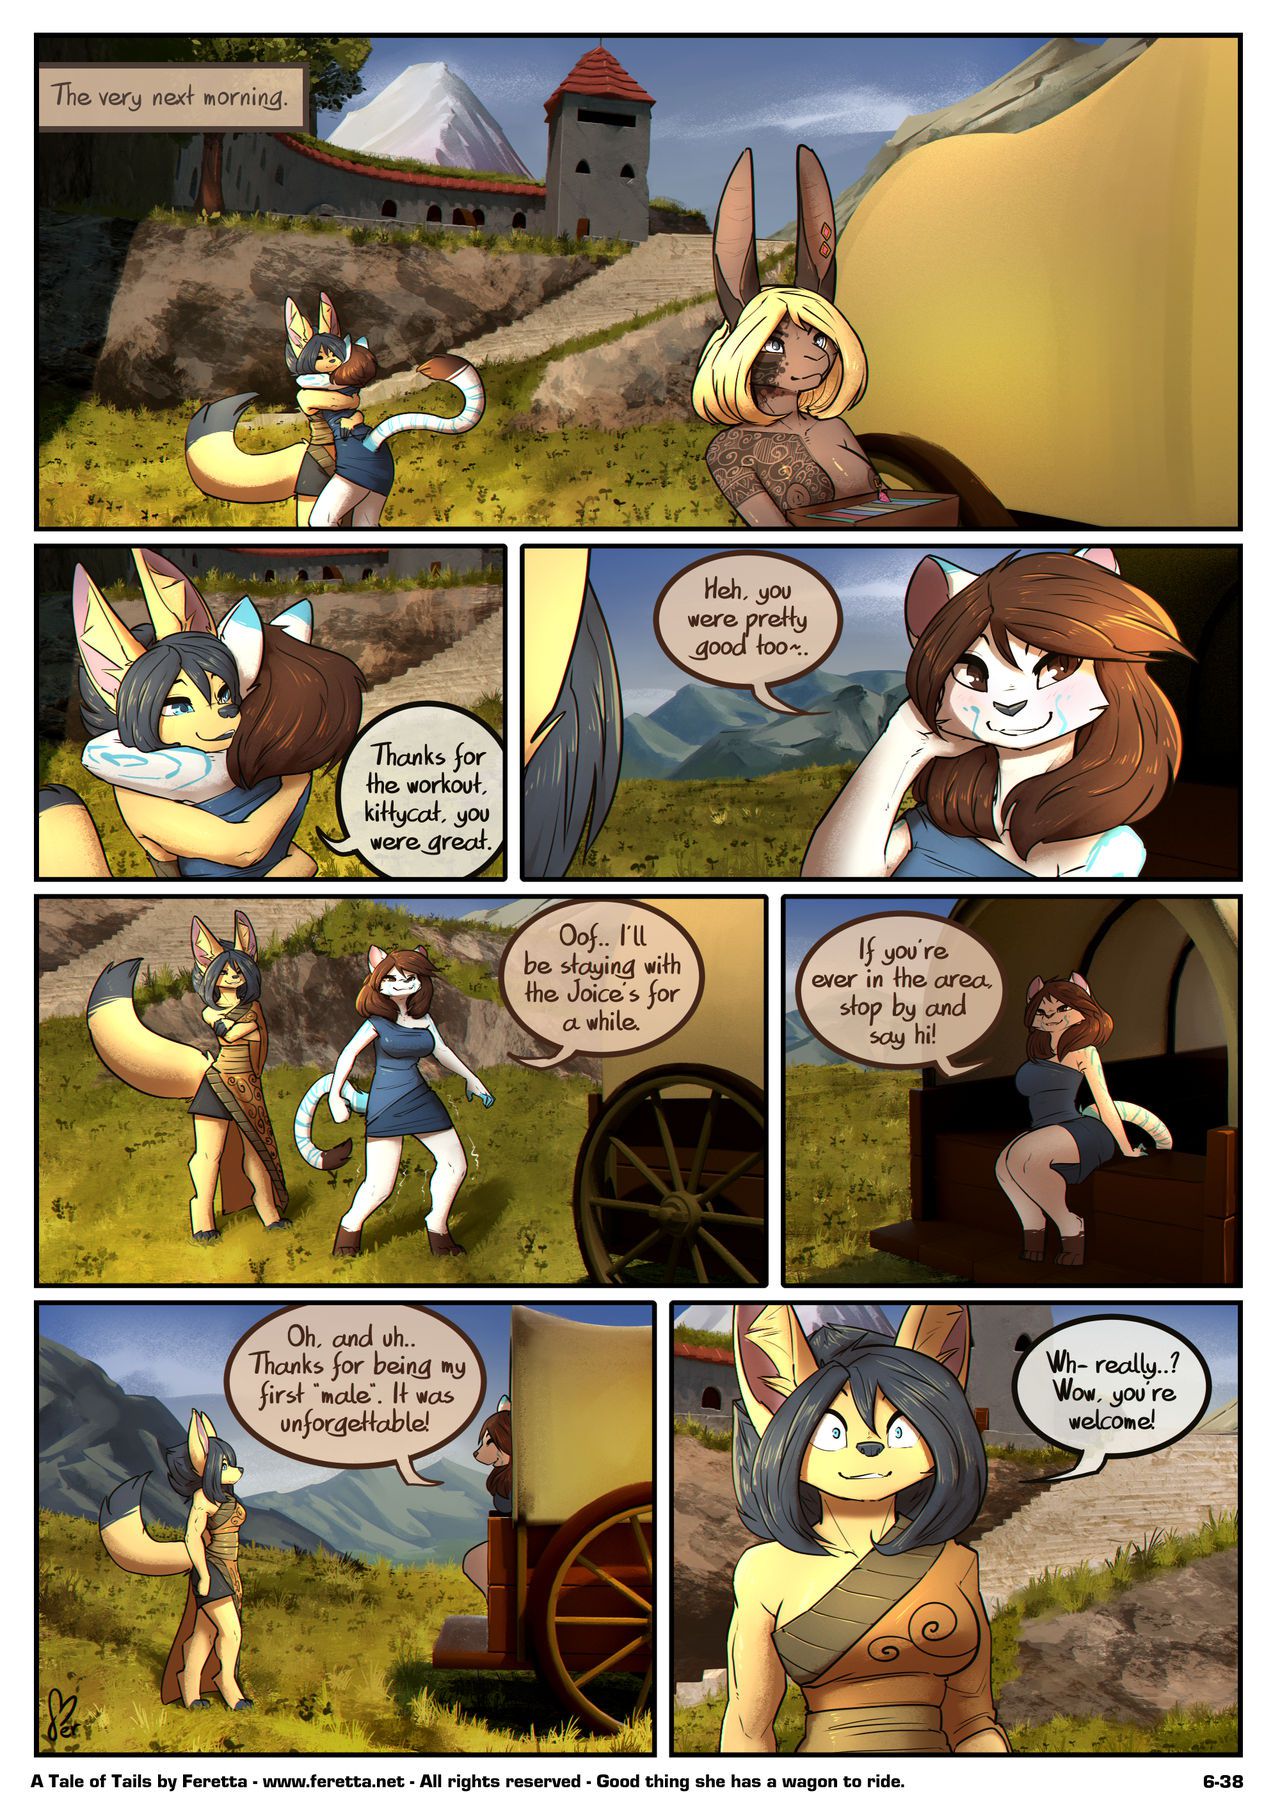 [Feretta] Farellian Legends: A Tale of Tails (w/Extras) [Ongoing] 333